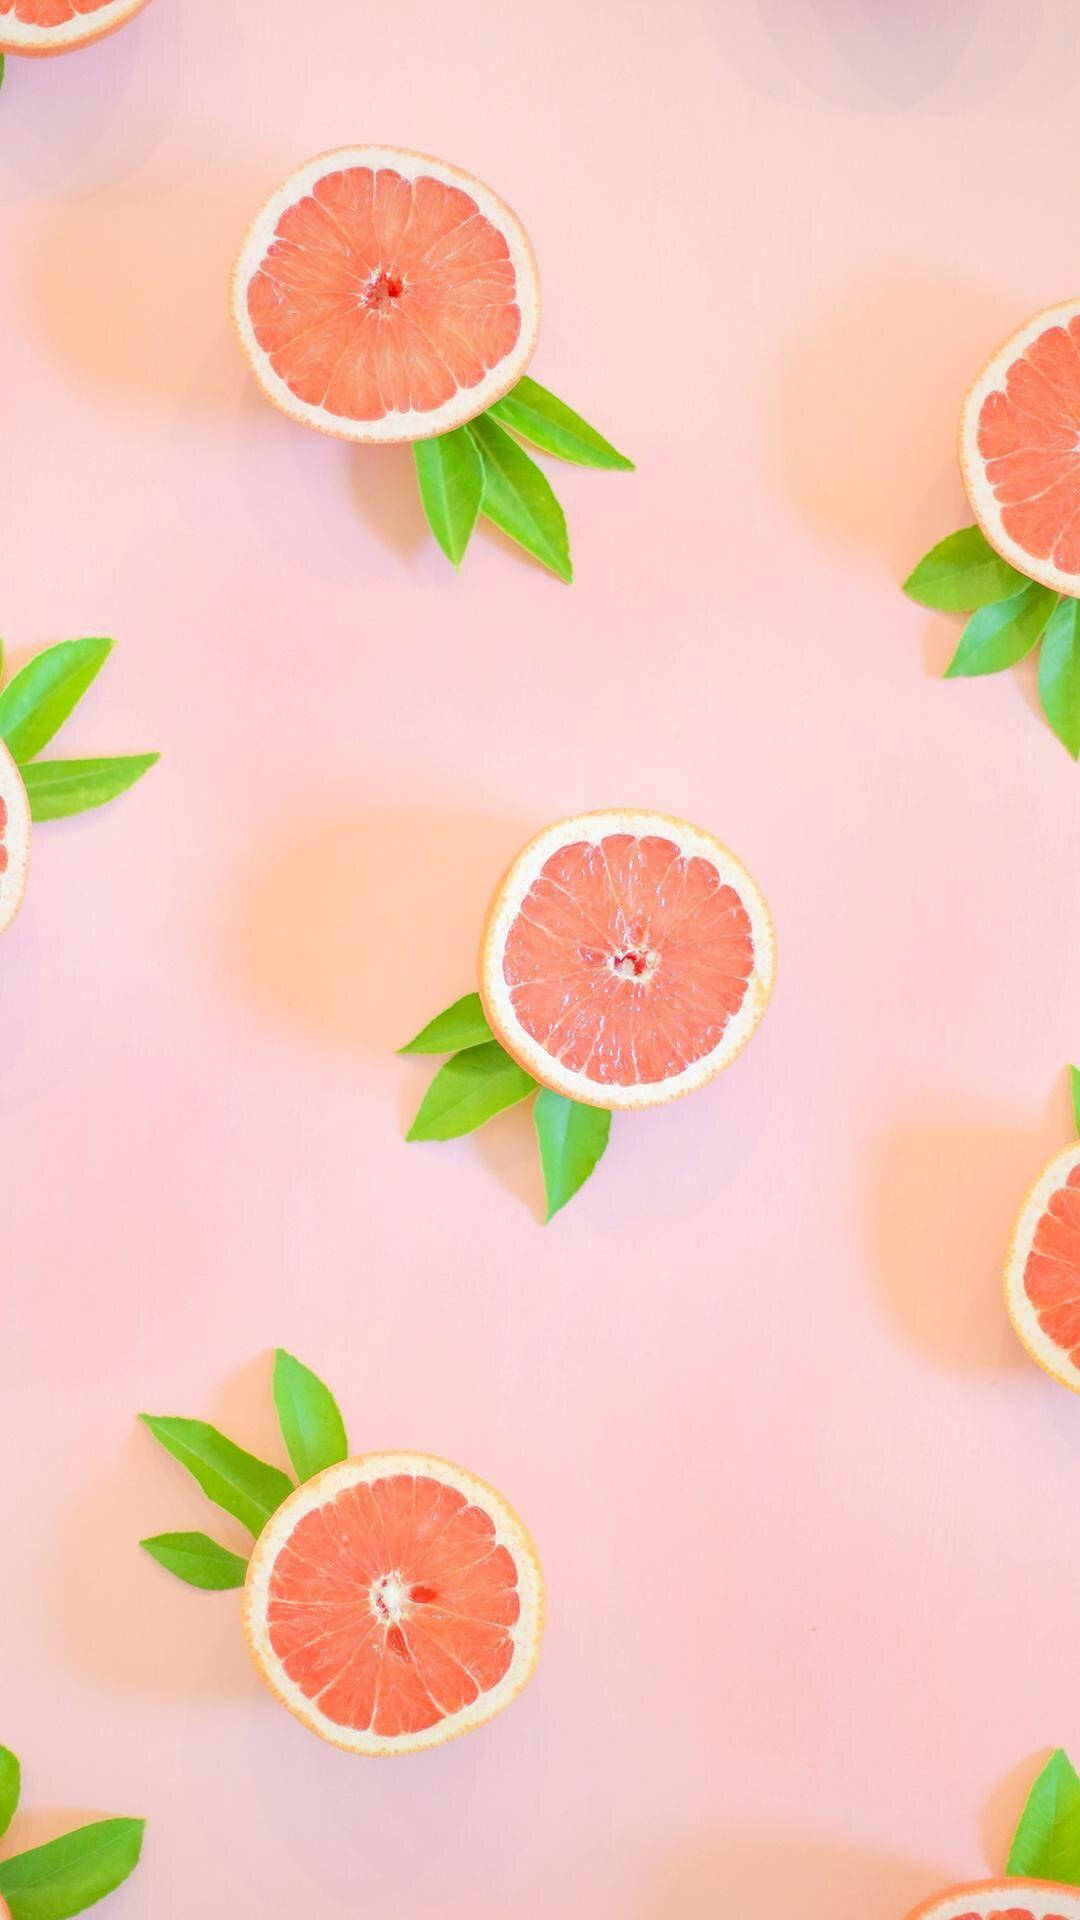 Aesthetic Pink Grapefruit With Leaves Wallpaper